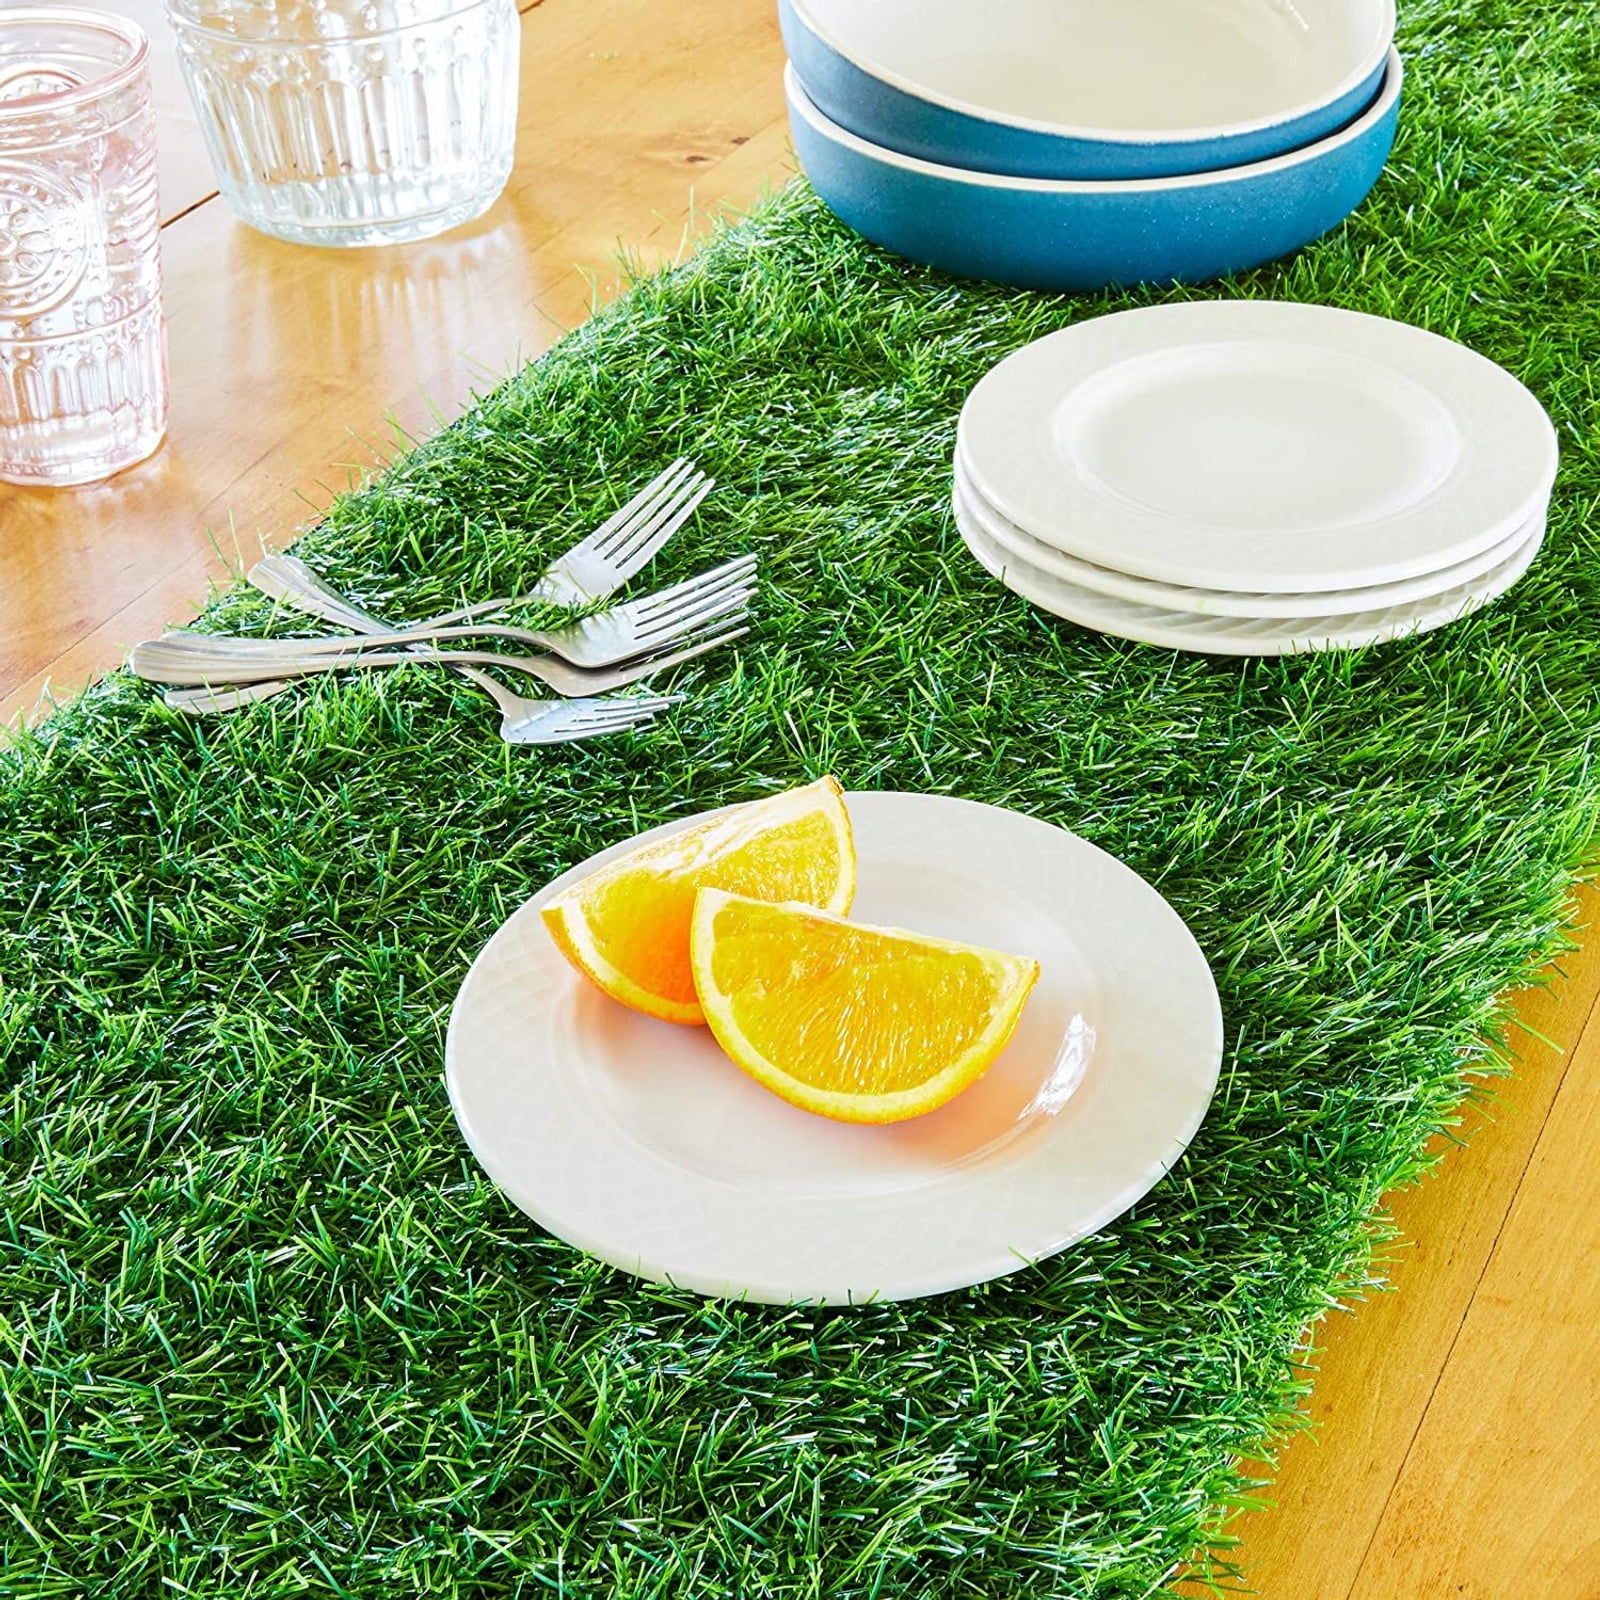  Artificial Grass Table Runner 14x48 Inch, Green Tabletop Decor  for Wedding, Birthday Party, Banquet, Baby Shower : Home & Kitchen